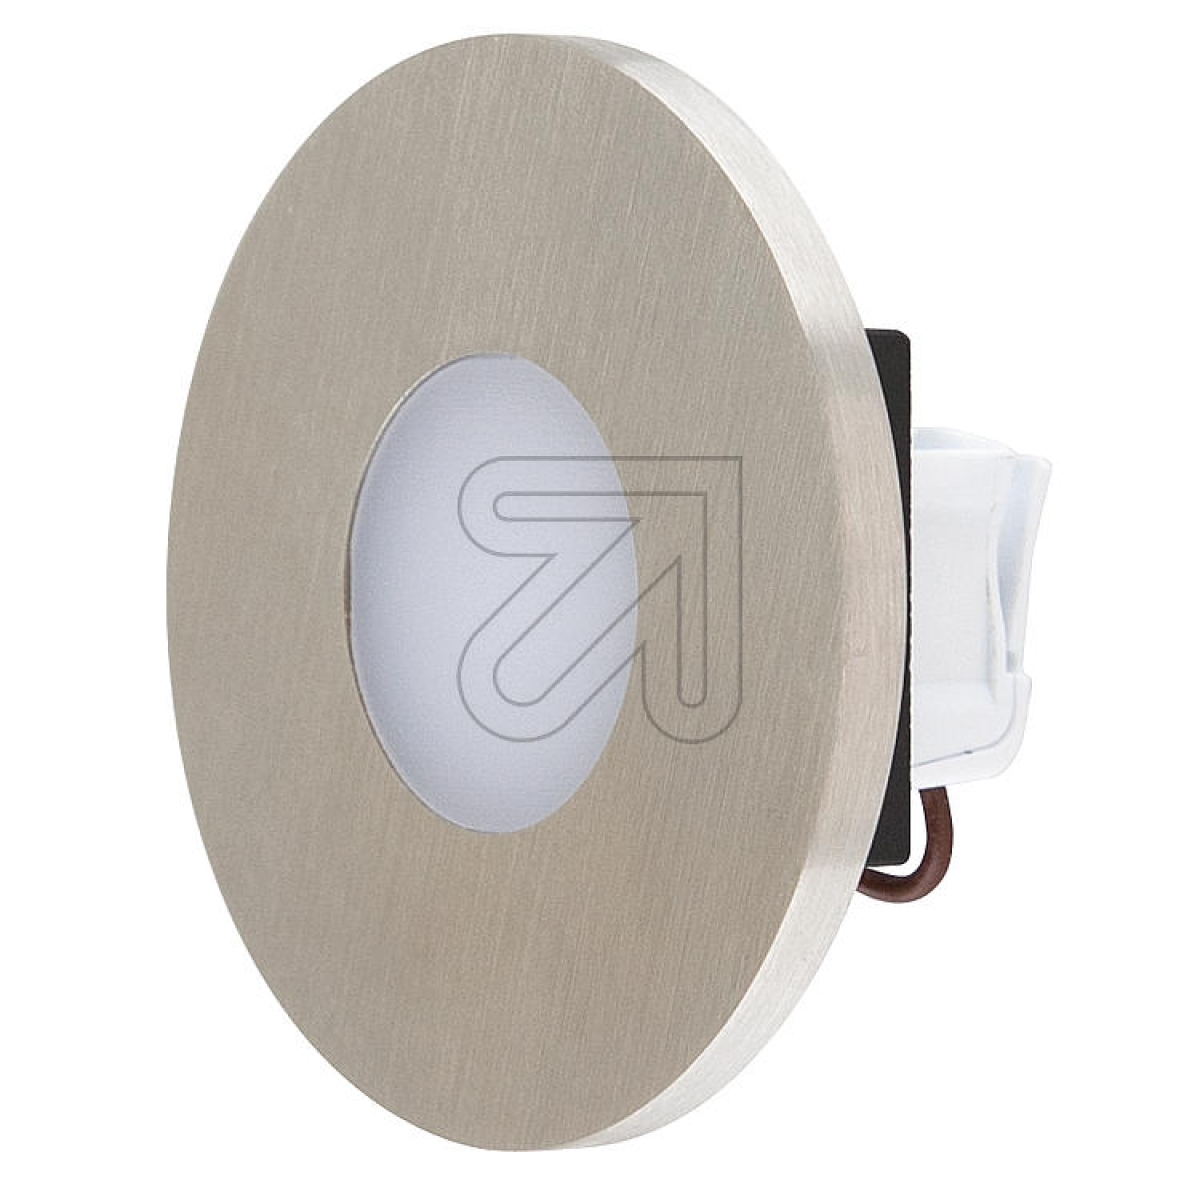 EVNLED recessed wall light IP44, 1.8W 4000K, stainless steel 230V, 65lm, LR01840Article-No: 650345